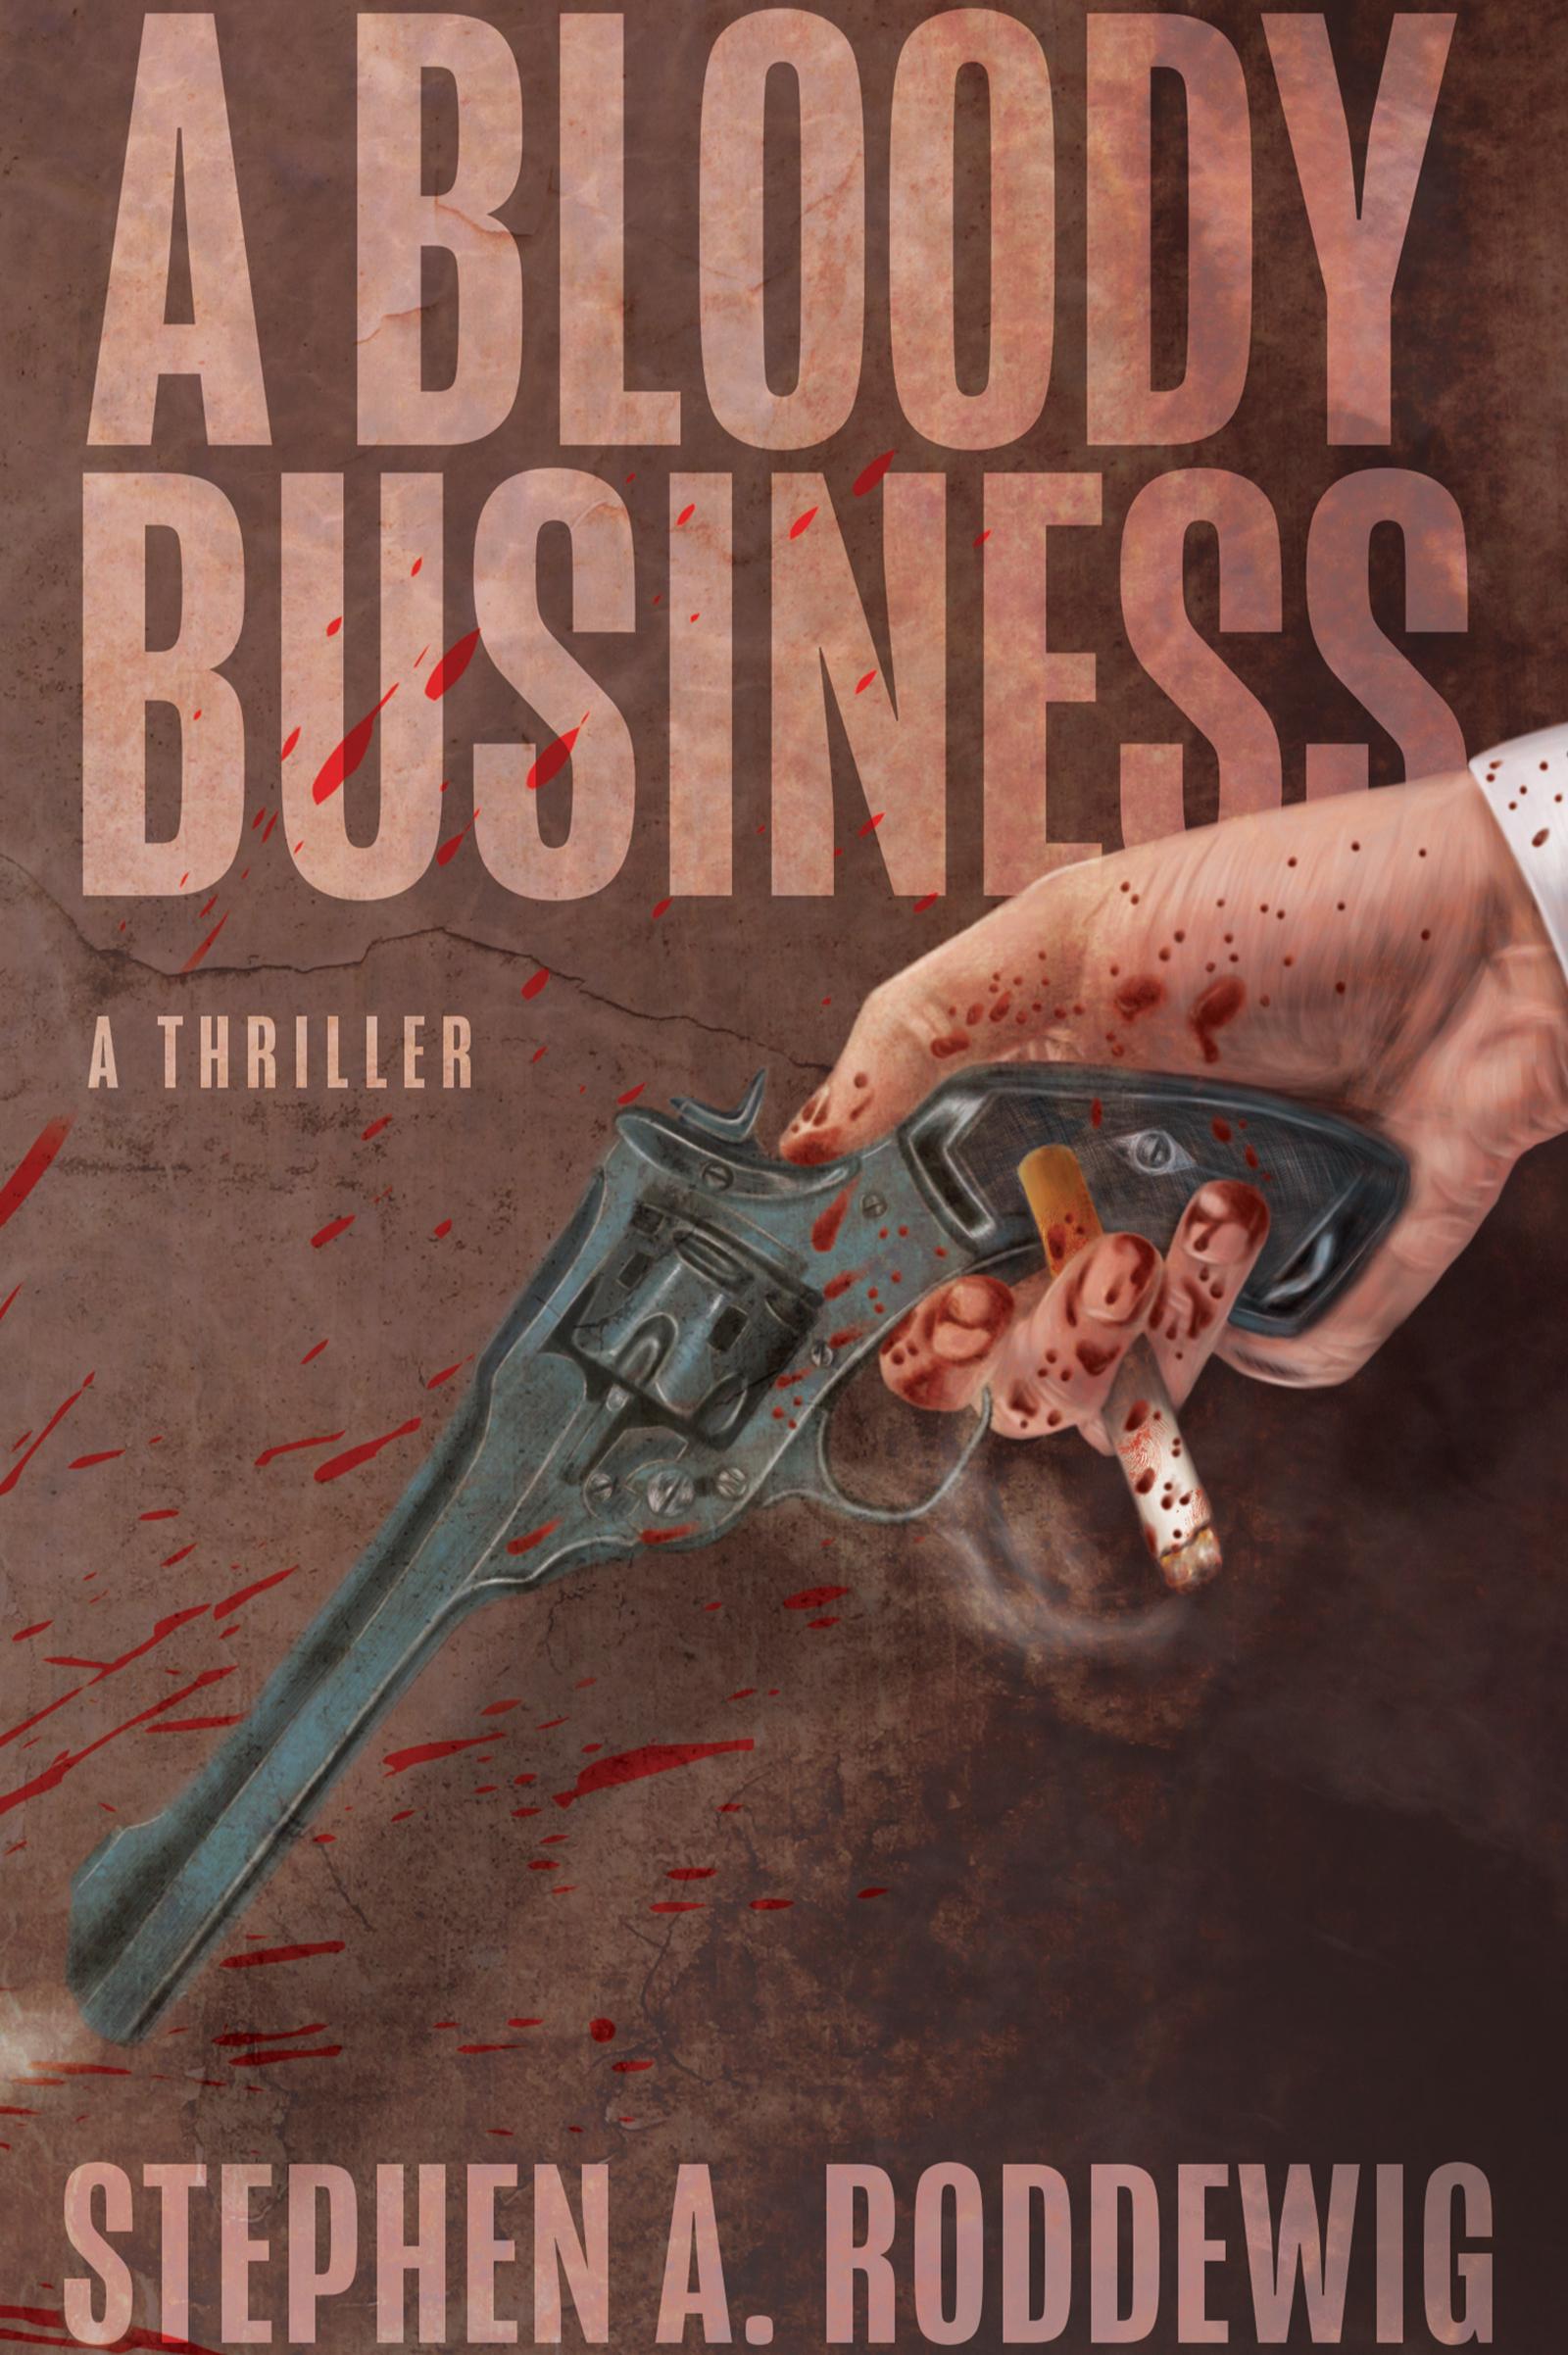 Book cover of A Bloody Business by Stephen A. Roddewig